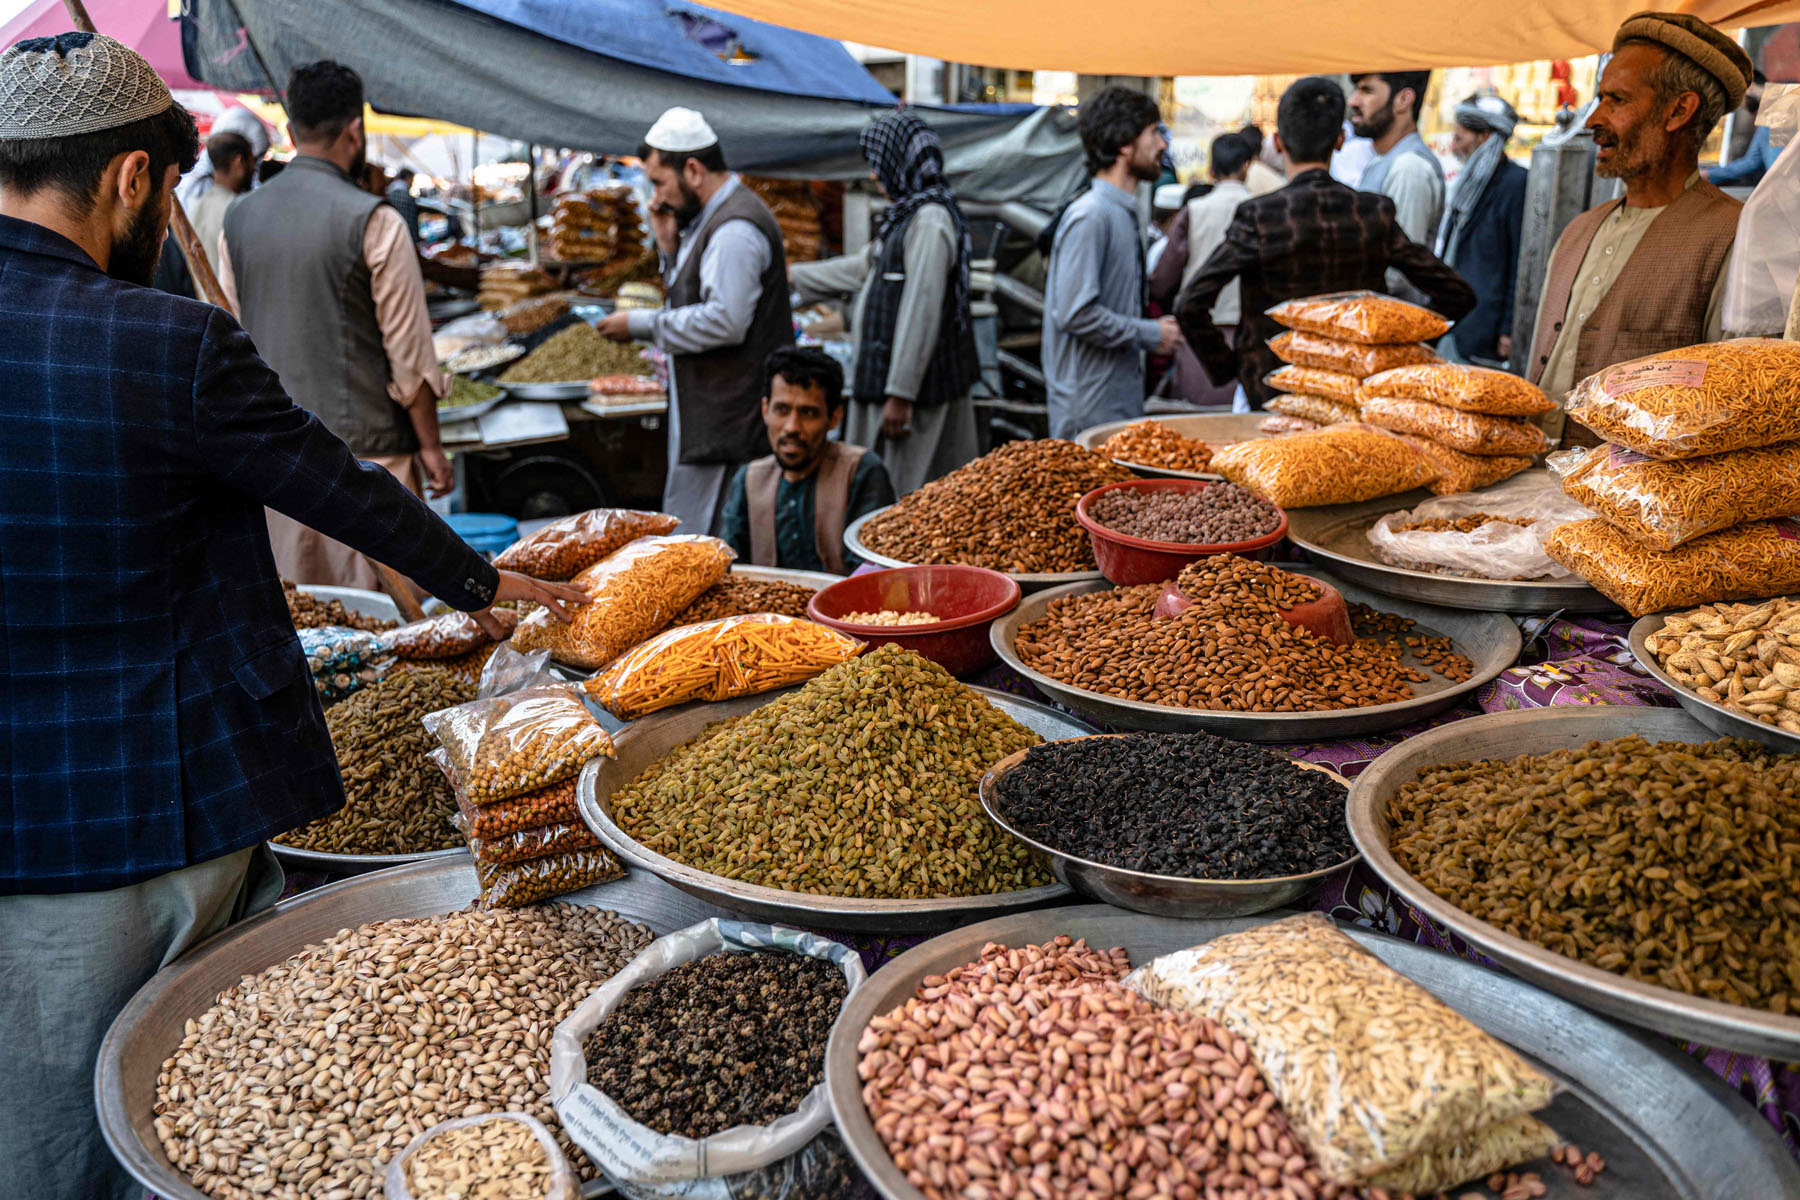 People buy dry fruits ahead of Eid al-Fitr which marks the end of the holy fasting month of Ramadan, at a market in Kabul on April 30, 2022. (Photo by Wakil KOHSAR / AFP)